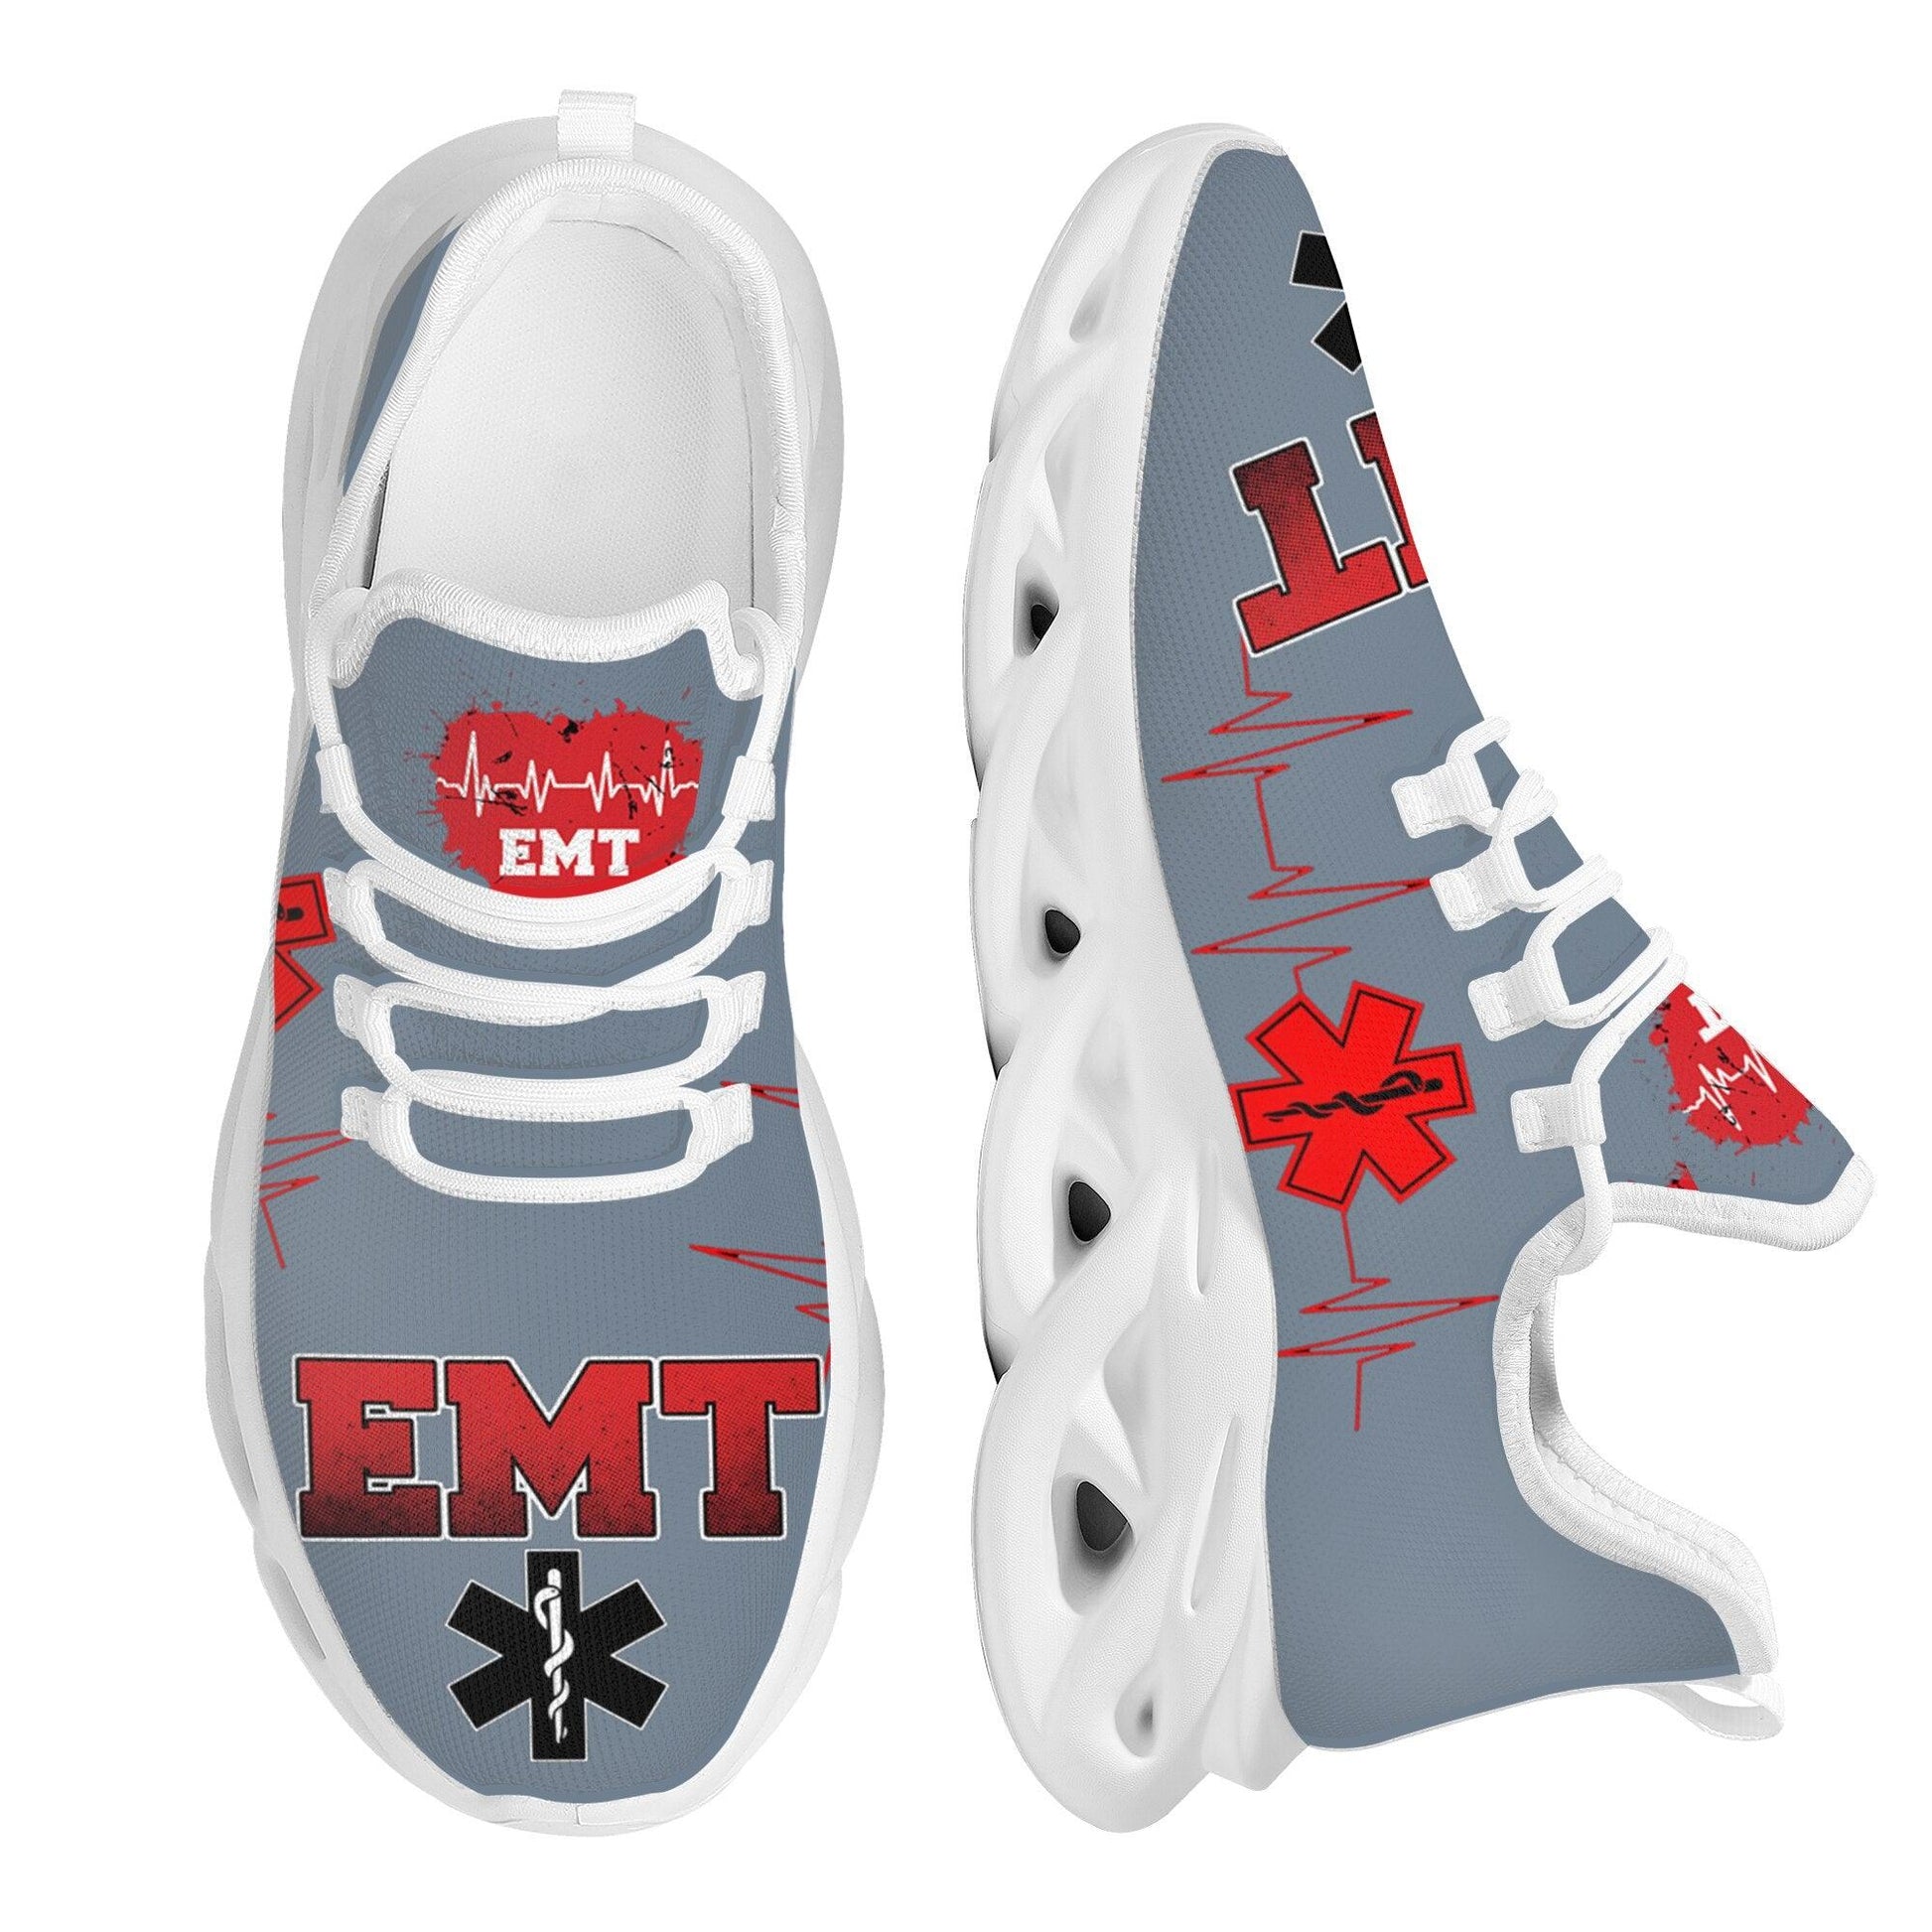 Paramedic EMT EMS Pattern Mesh Grey Sneakers for Women Breathable Footwear - Thumbedtreats